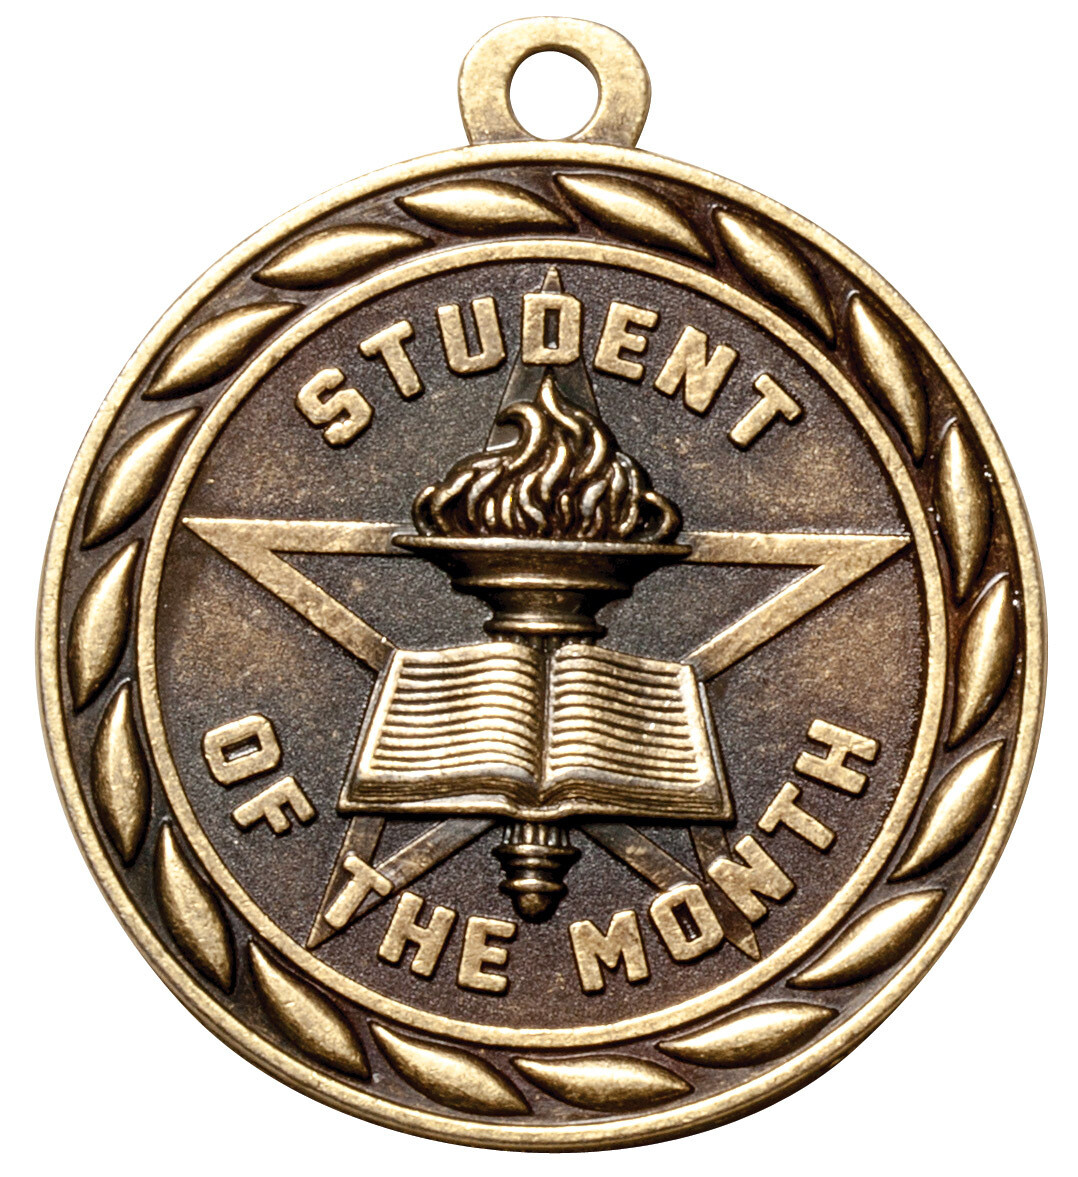 Scholastic Medal Series
STUDENT OF THE MONTH